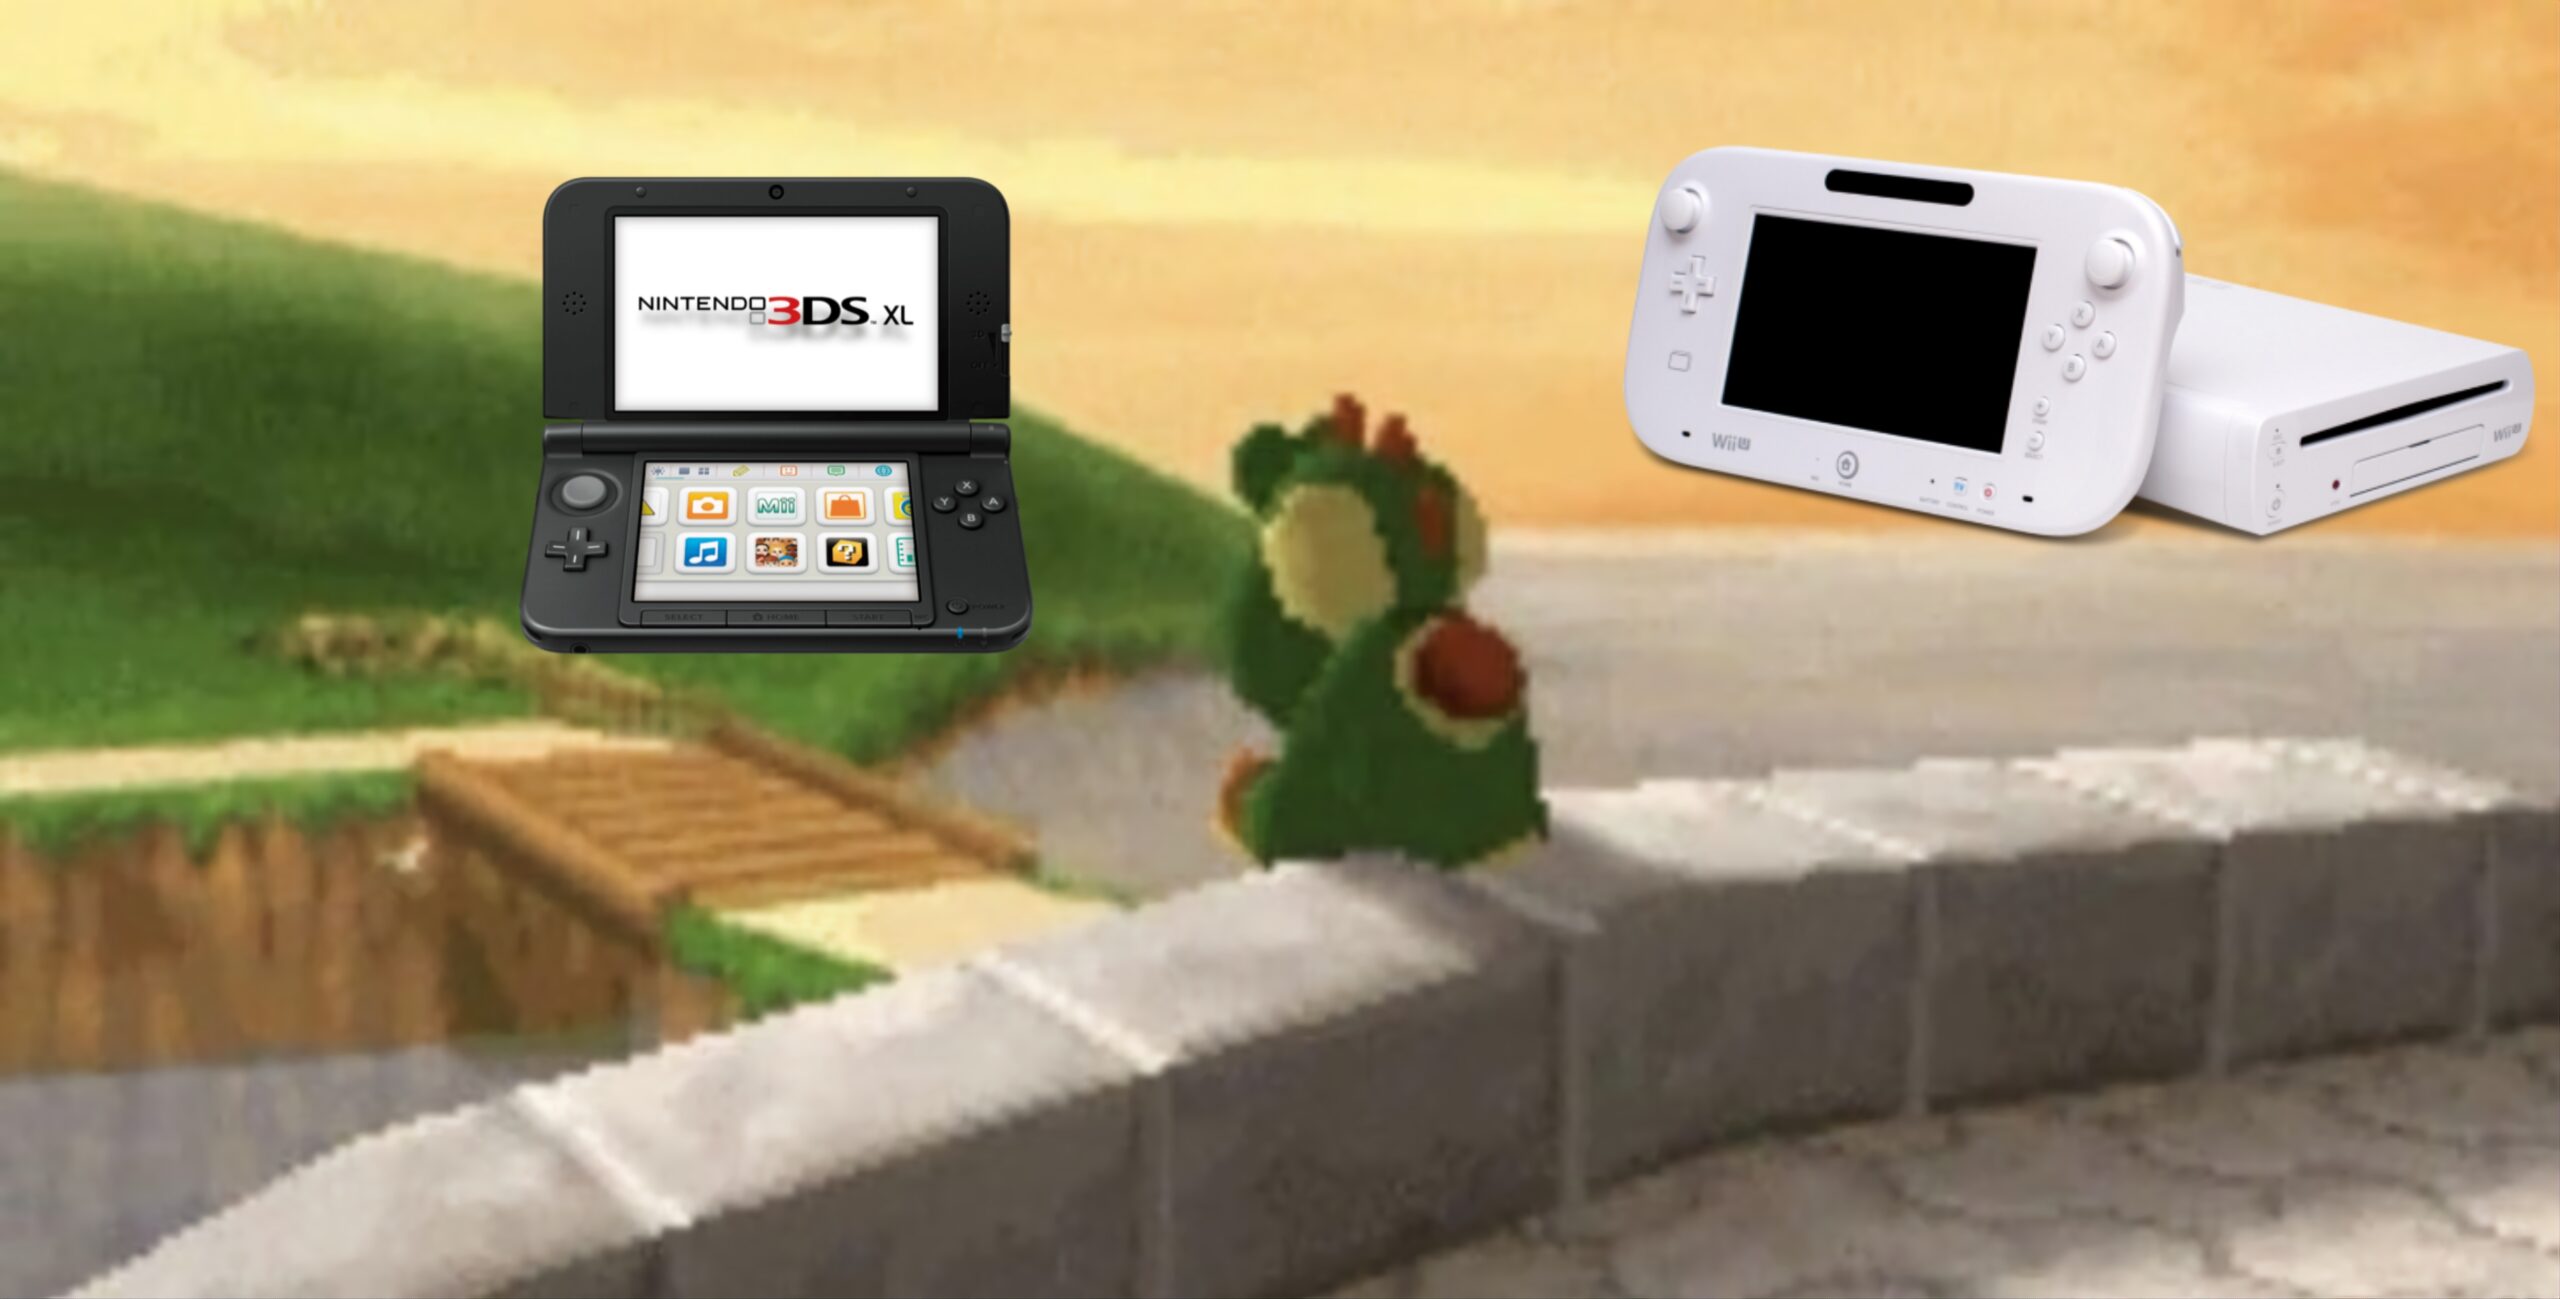 Online Services For Nintendo 3DS and Wii U Will Be Discontinued on